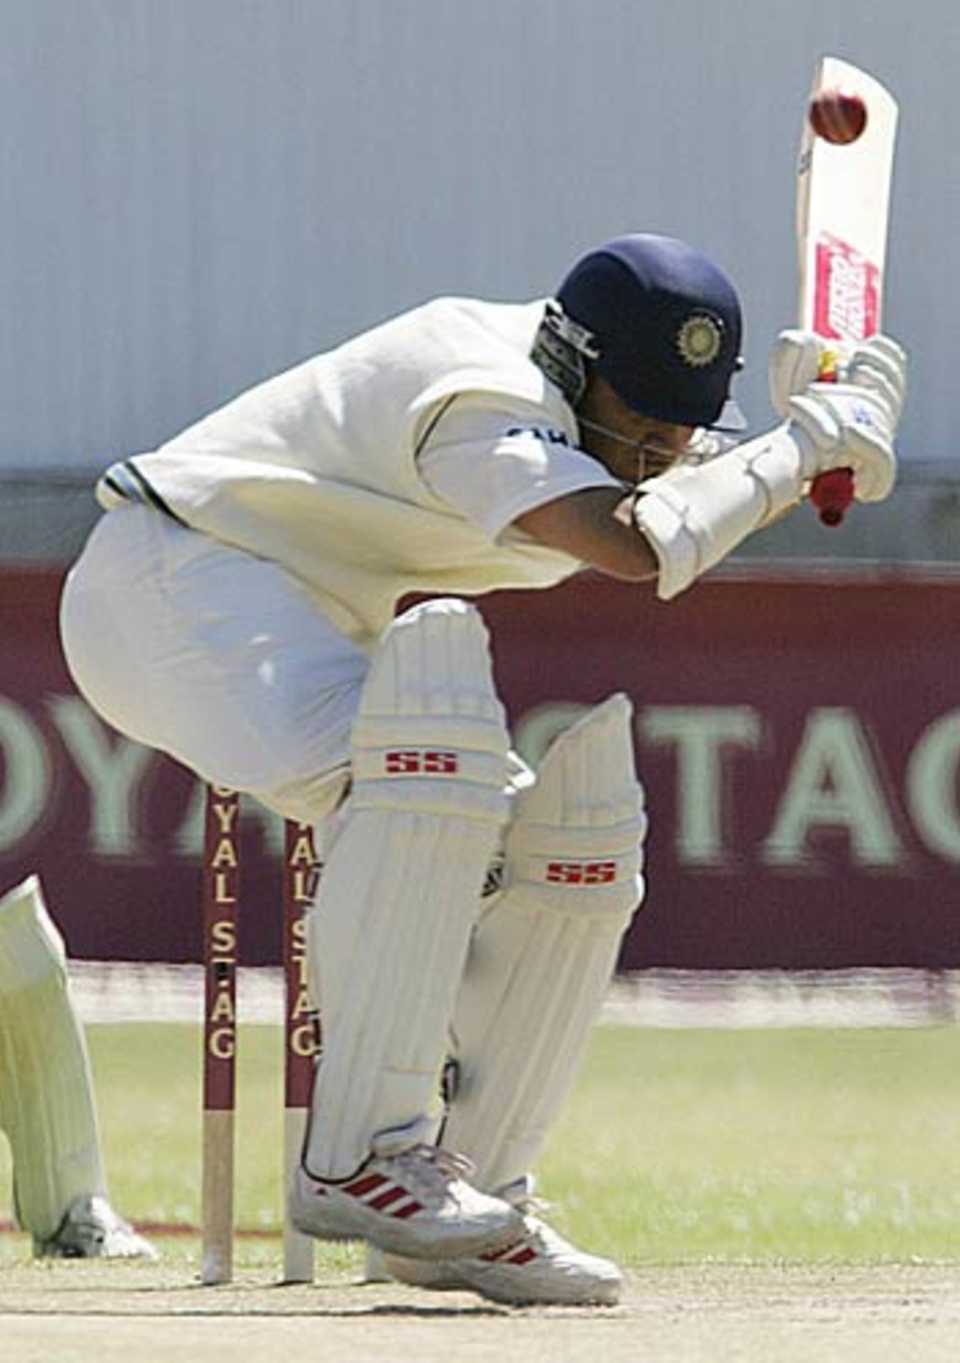 Sourav Ganguly's bat pokes out dangerously as he takes evasive action